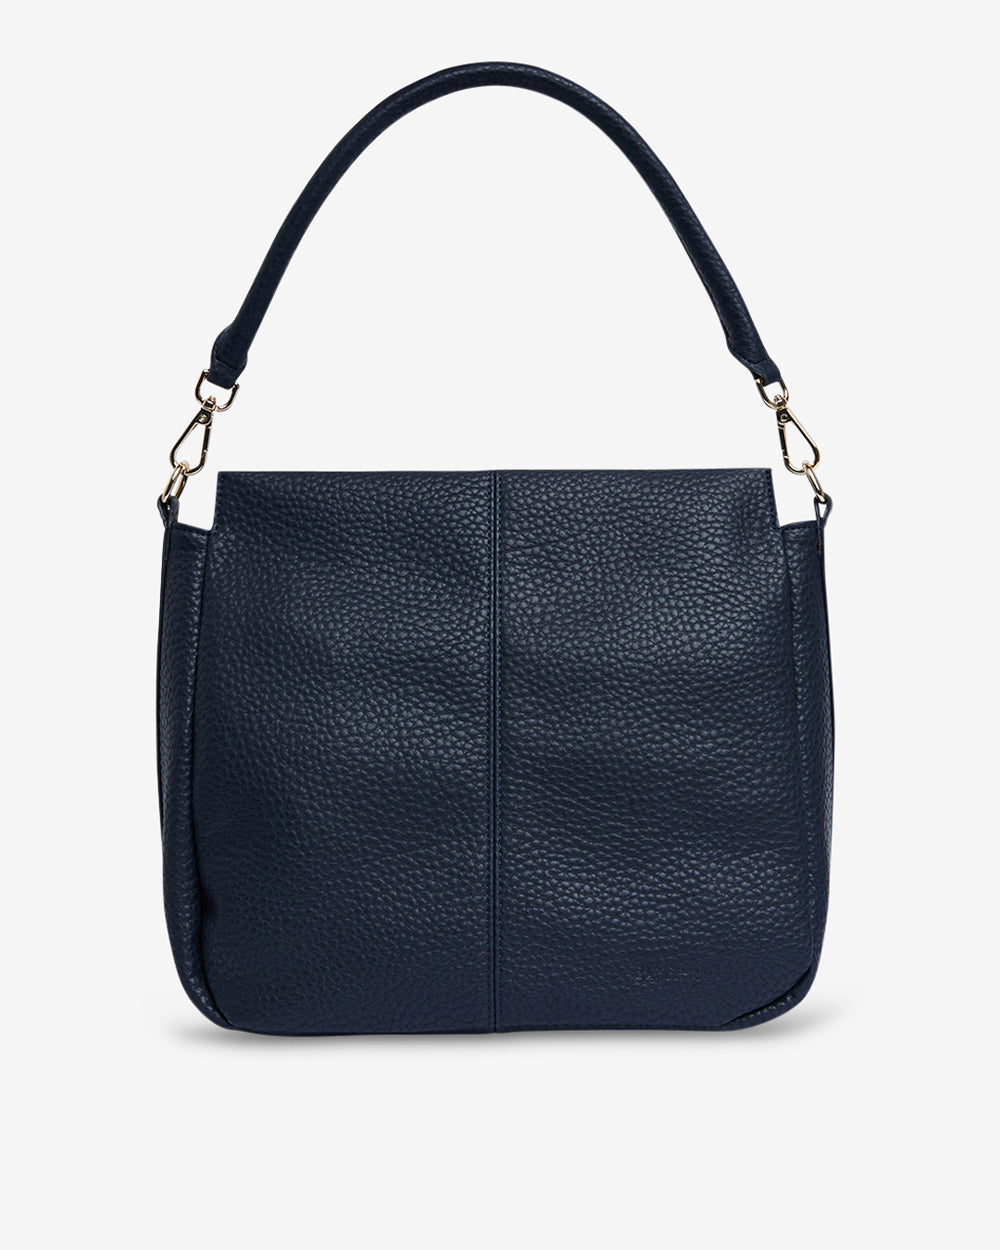 Bellevue Tote - French Navy